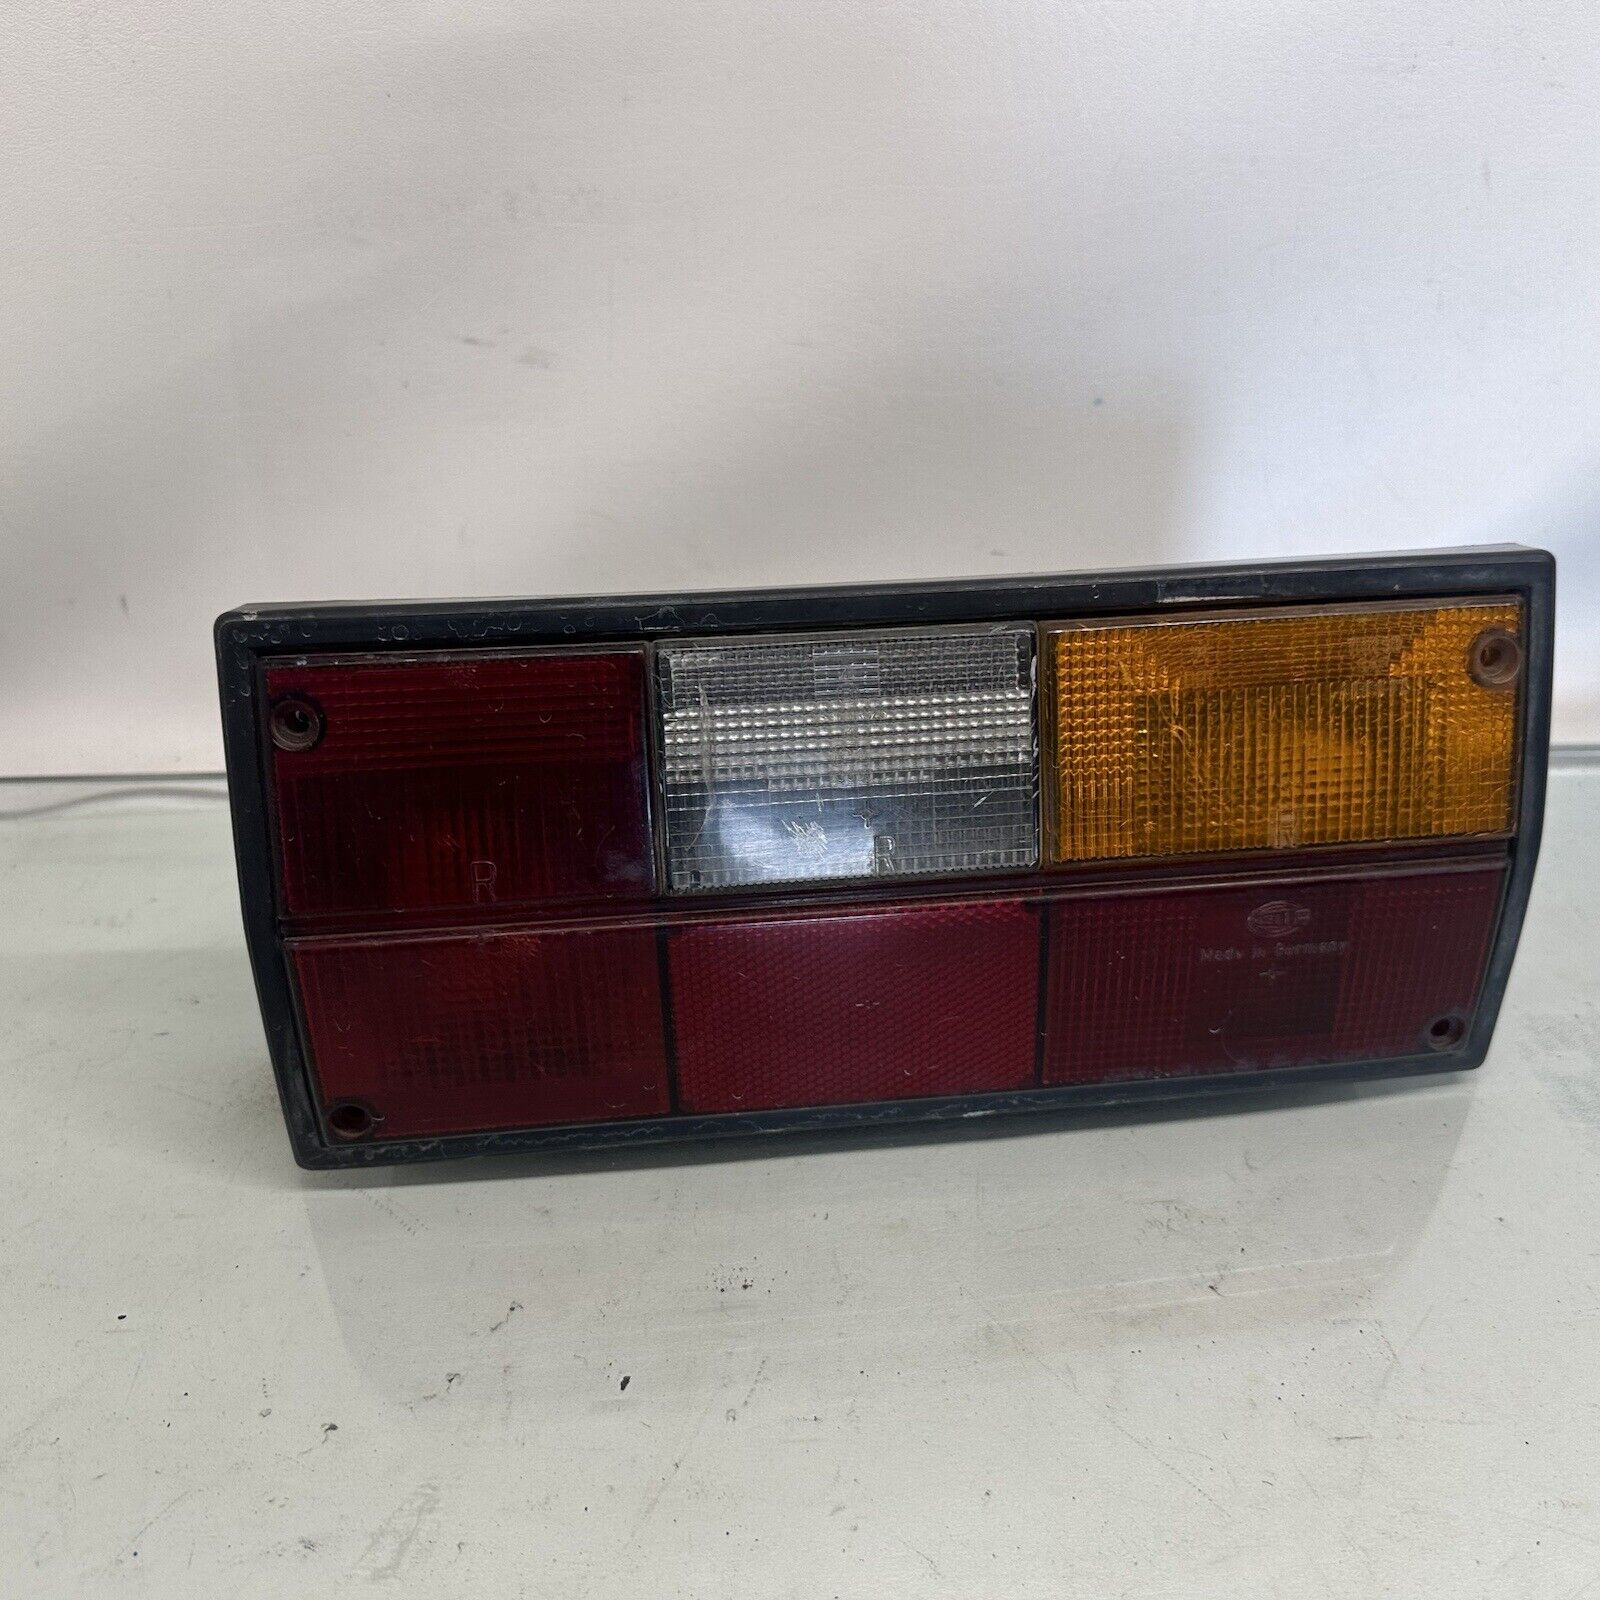 Volkswagen Vanagon Right Tail light lens Assembly 1981-1991 Some Damage